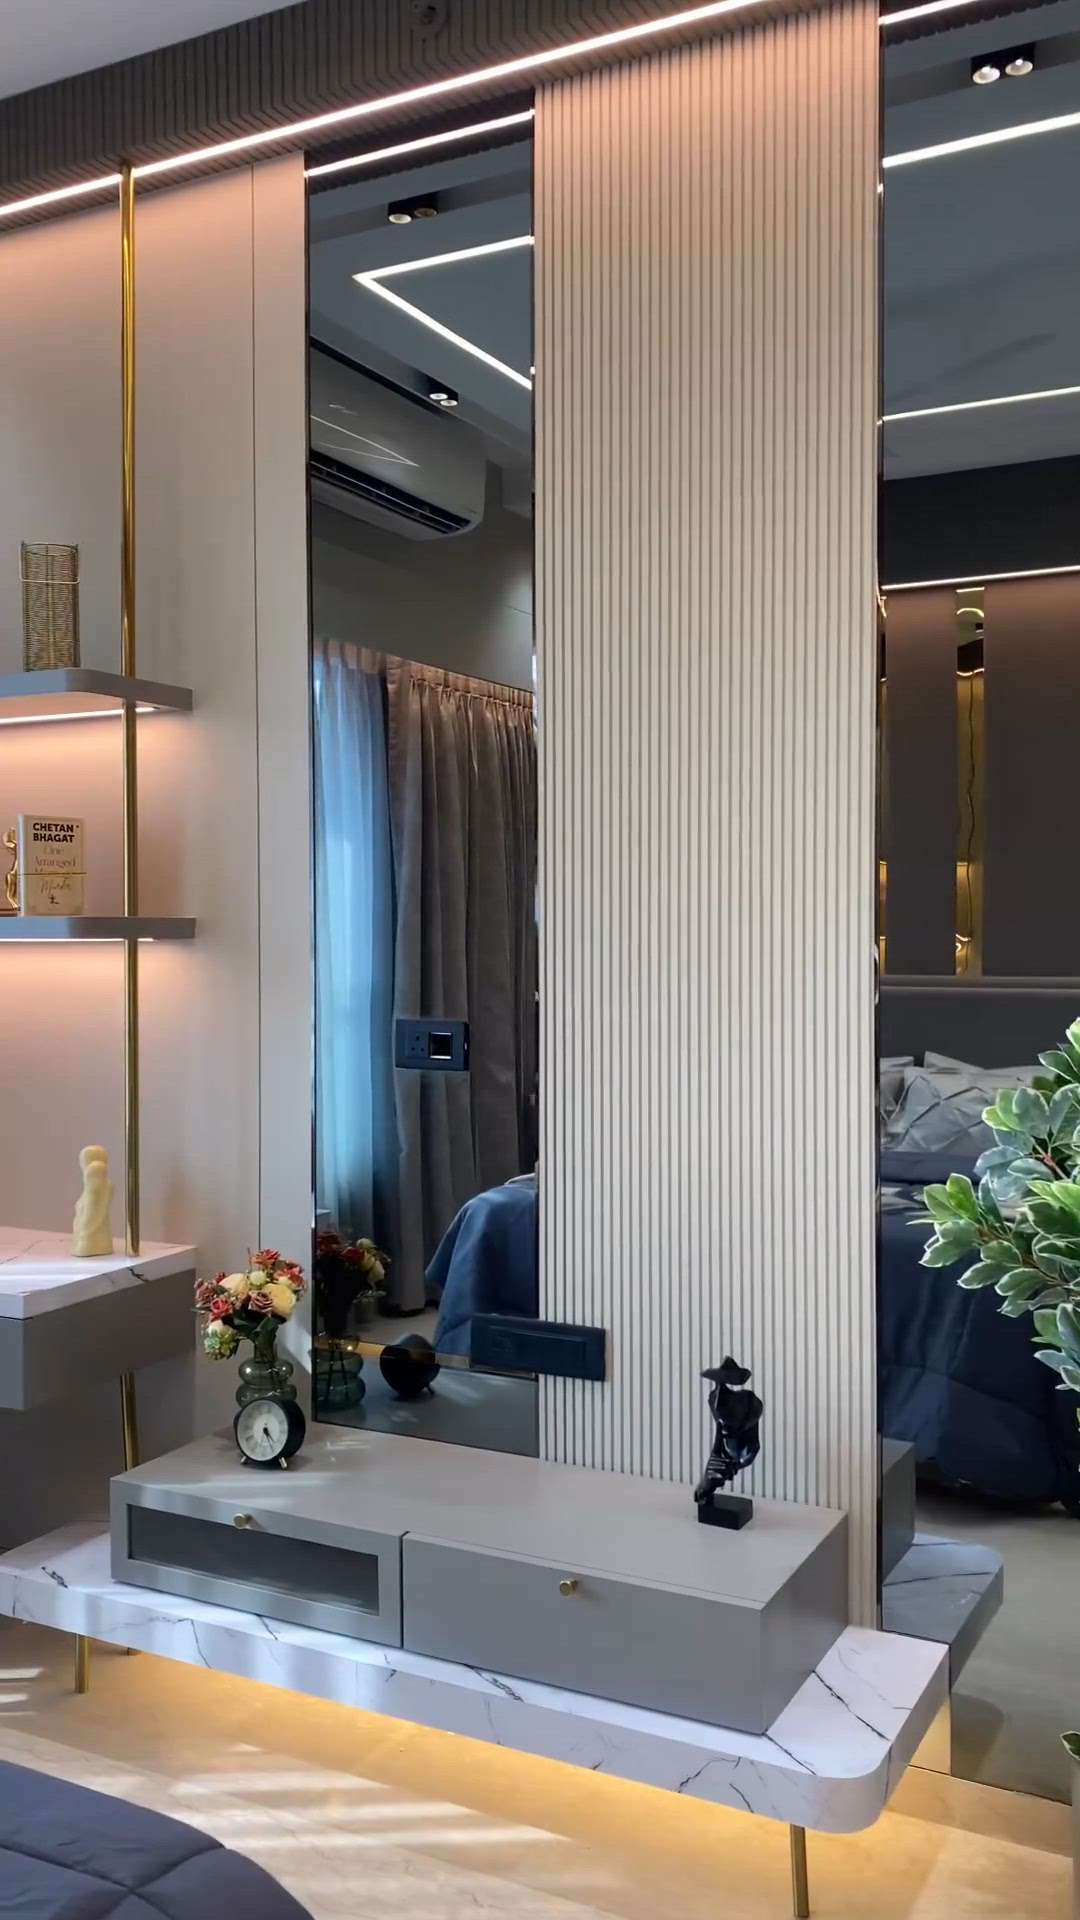 Looking for one-stop interior design solutions for your dream home or office? 😍
At Stunning decor, we don't just build homes but craft your desires into fresh designs to make you fall in love with your home! ✨
Get your dream home designed by us 💫furniture
📩 Comment or DM ' smart ' to order
📞Contact -
💻 https://stunningdecor..com
Follow 👉@stunningdecor
Follow👉 @stunningdecor
Follow👉 @stunninhdecor
➖➖➖➖➖➖➖➖
#interiordesign #designinterior #interiordesigner #designdeinteriores #interiordesignideas #interiordesigners #designerdeinteriores #interiordesigns #interiordesigninspiration
. # # #